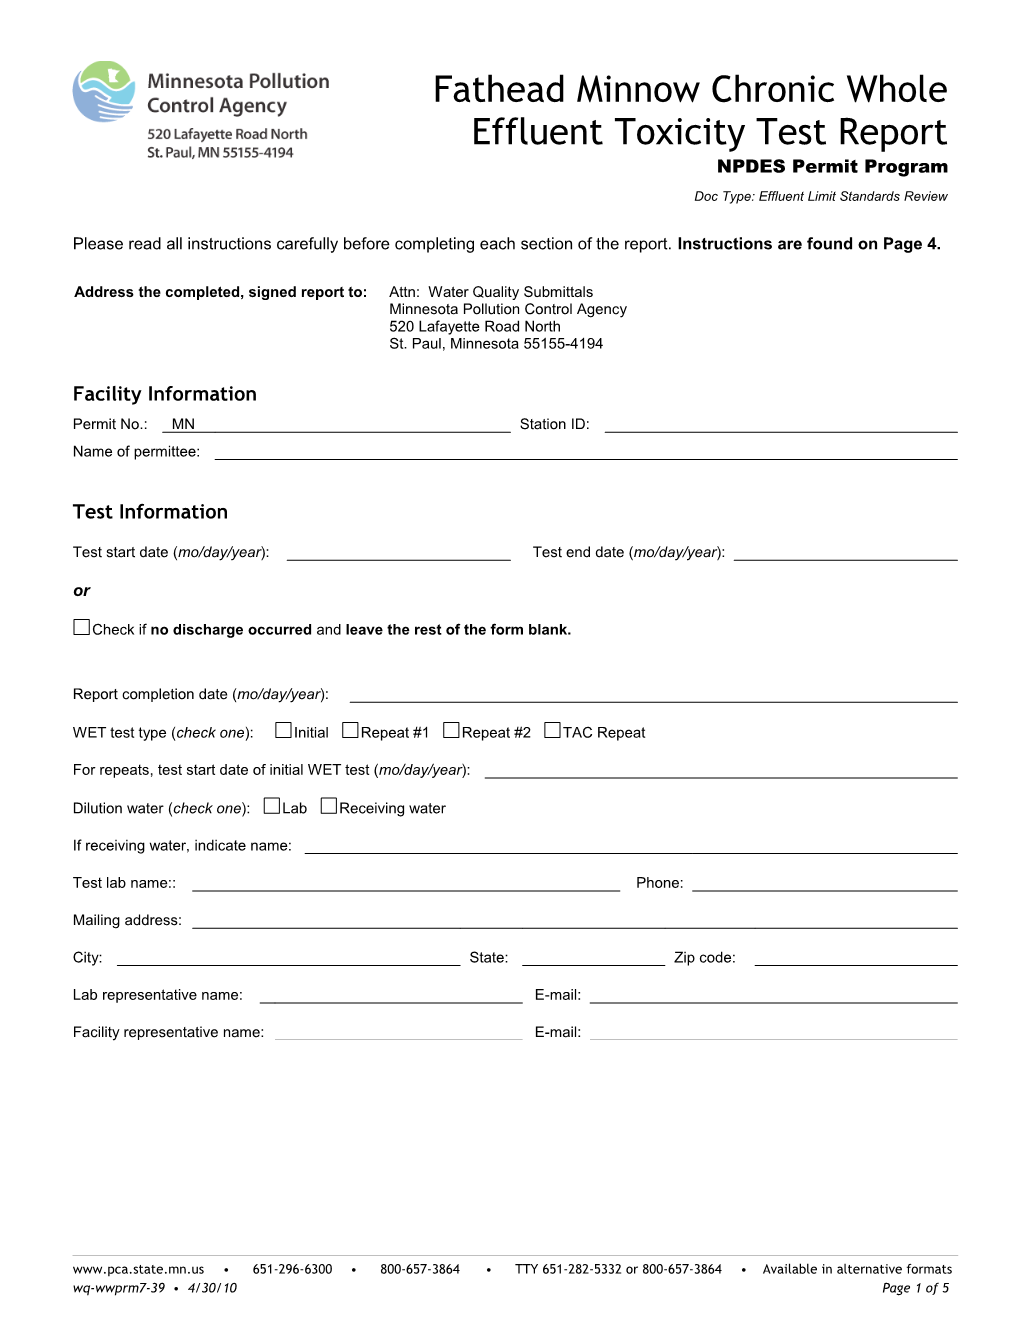 Fathead Chronic Whole Effluent Toxicity Test Report - Form